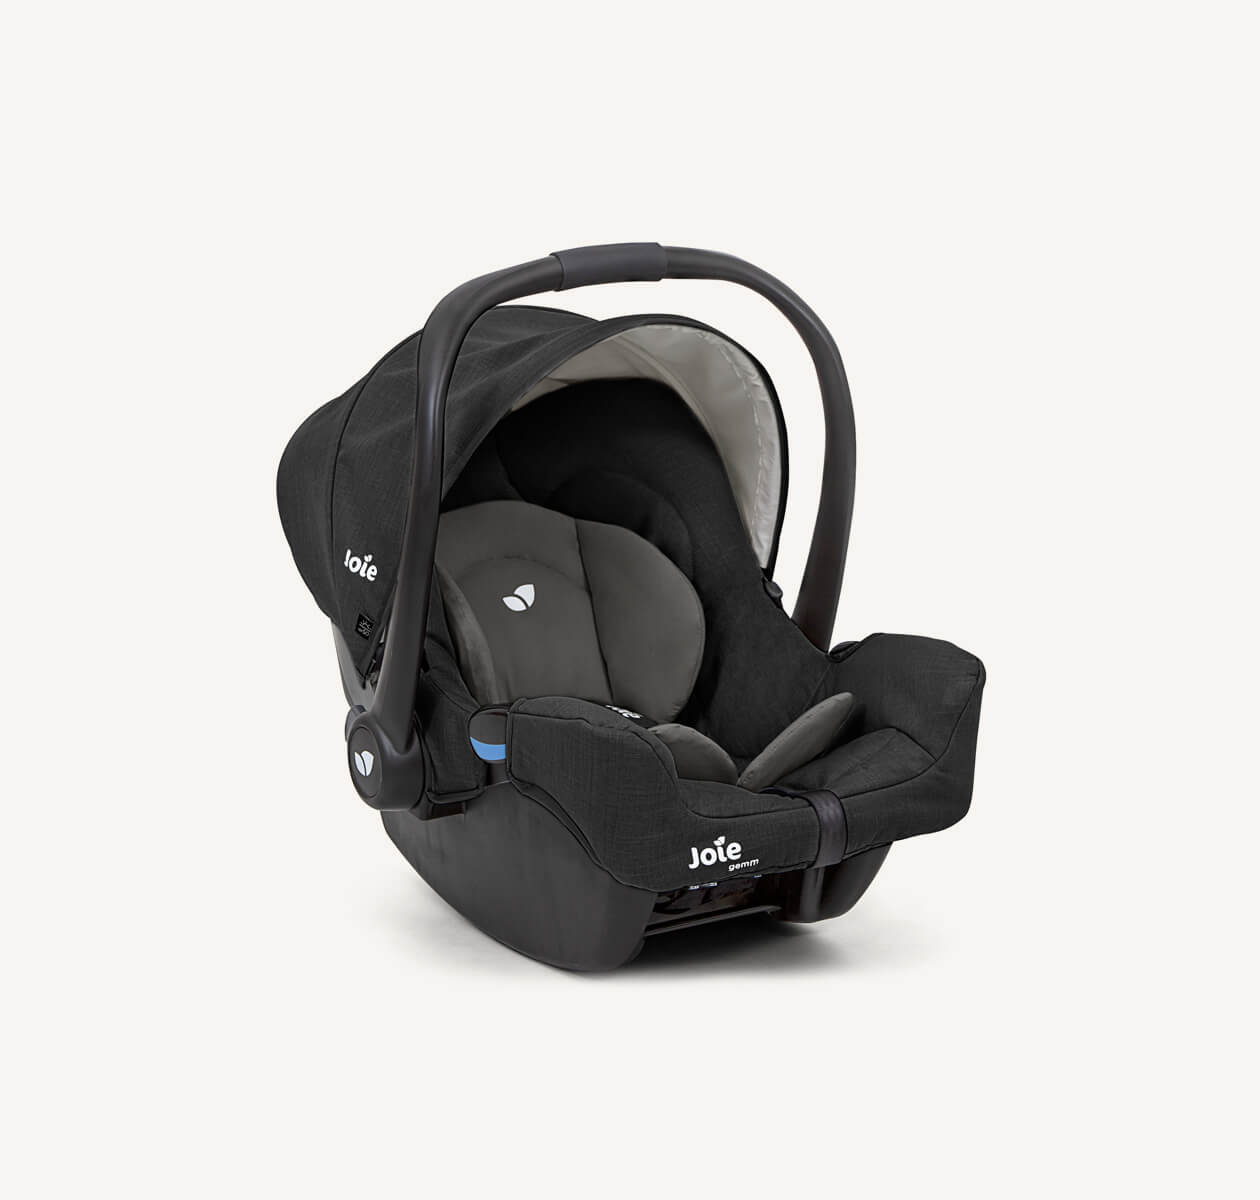   Joie gemm baby car seat in black facing at a right angle with canopy raised.